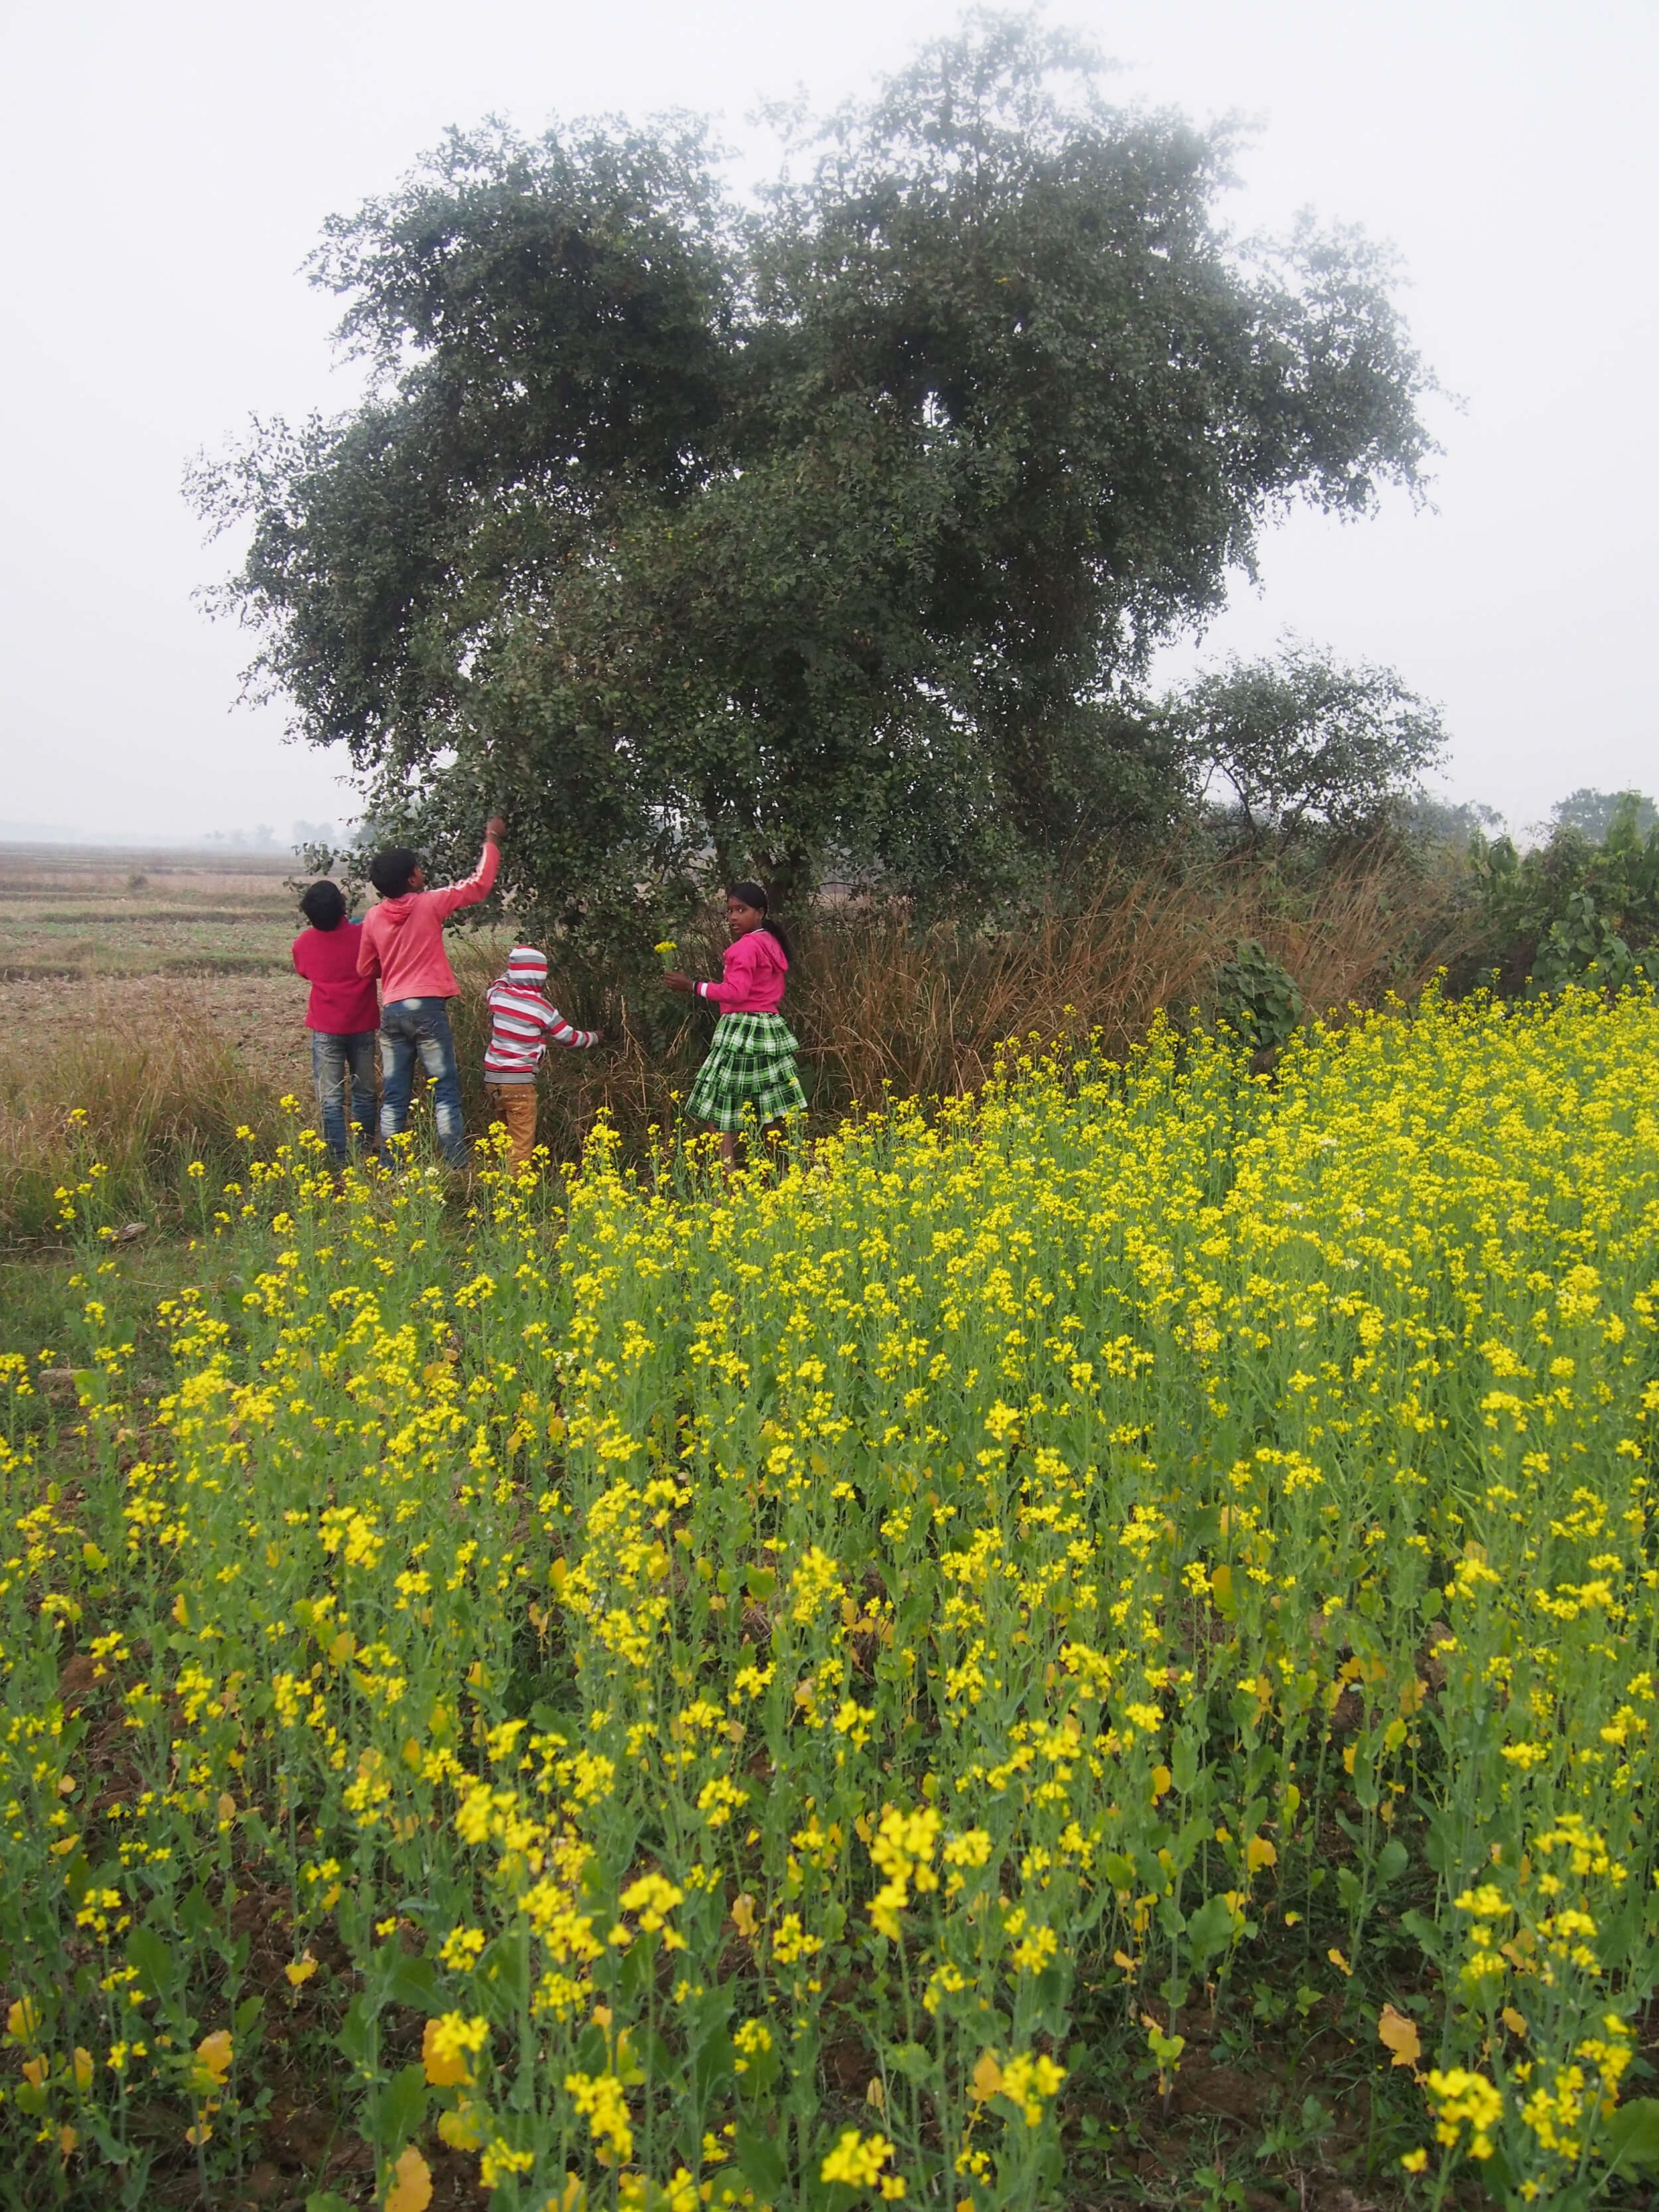 Children playing in mustard flower fields in the suburbs of India